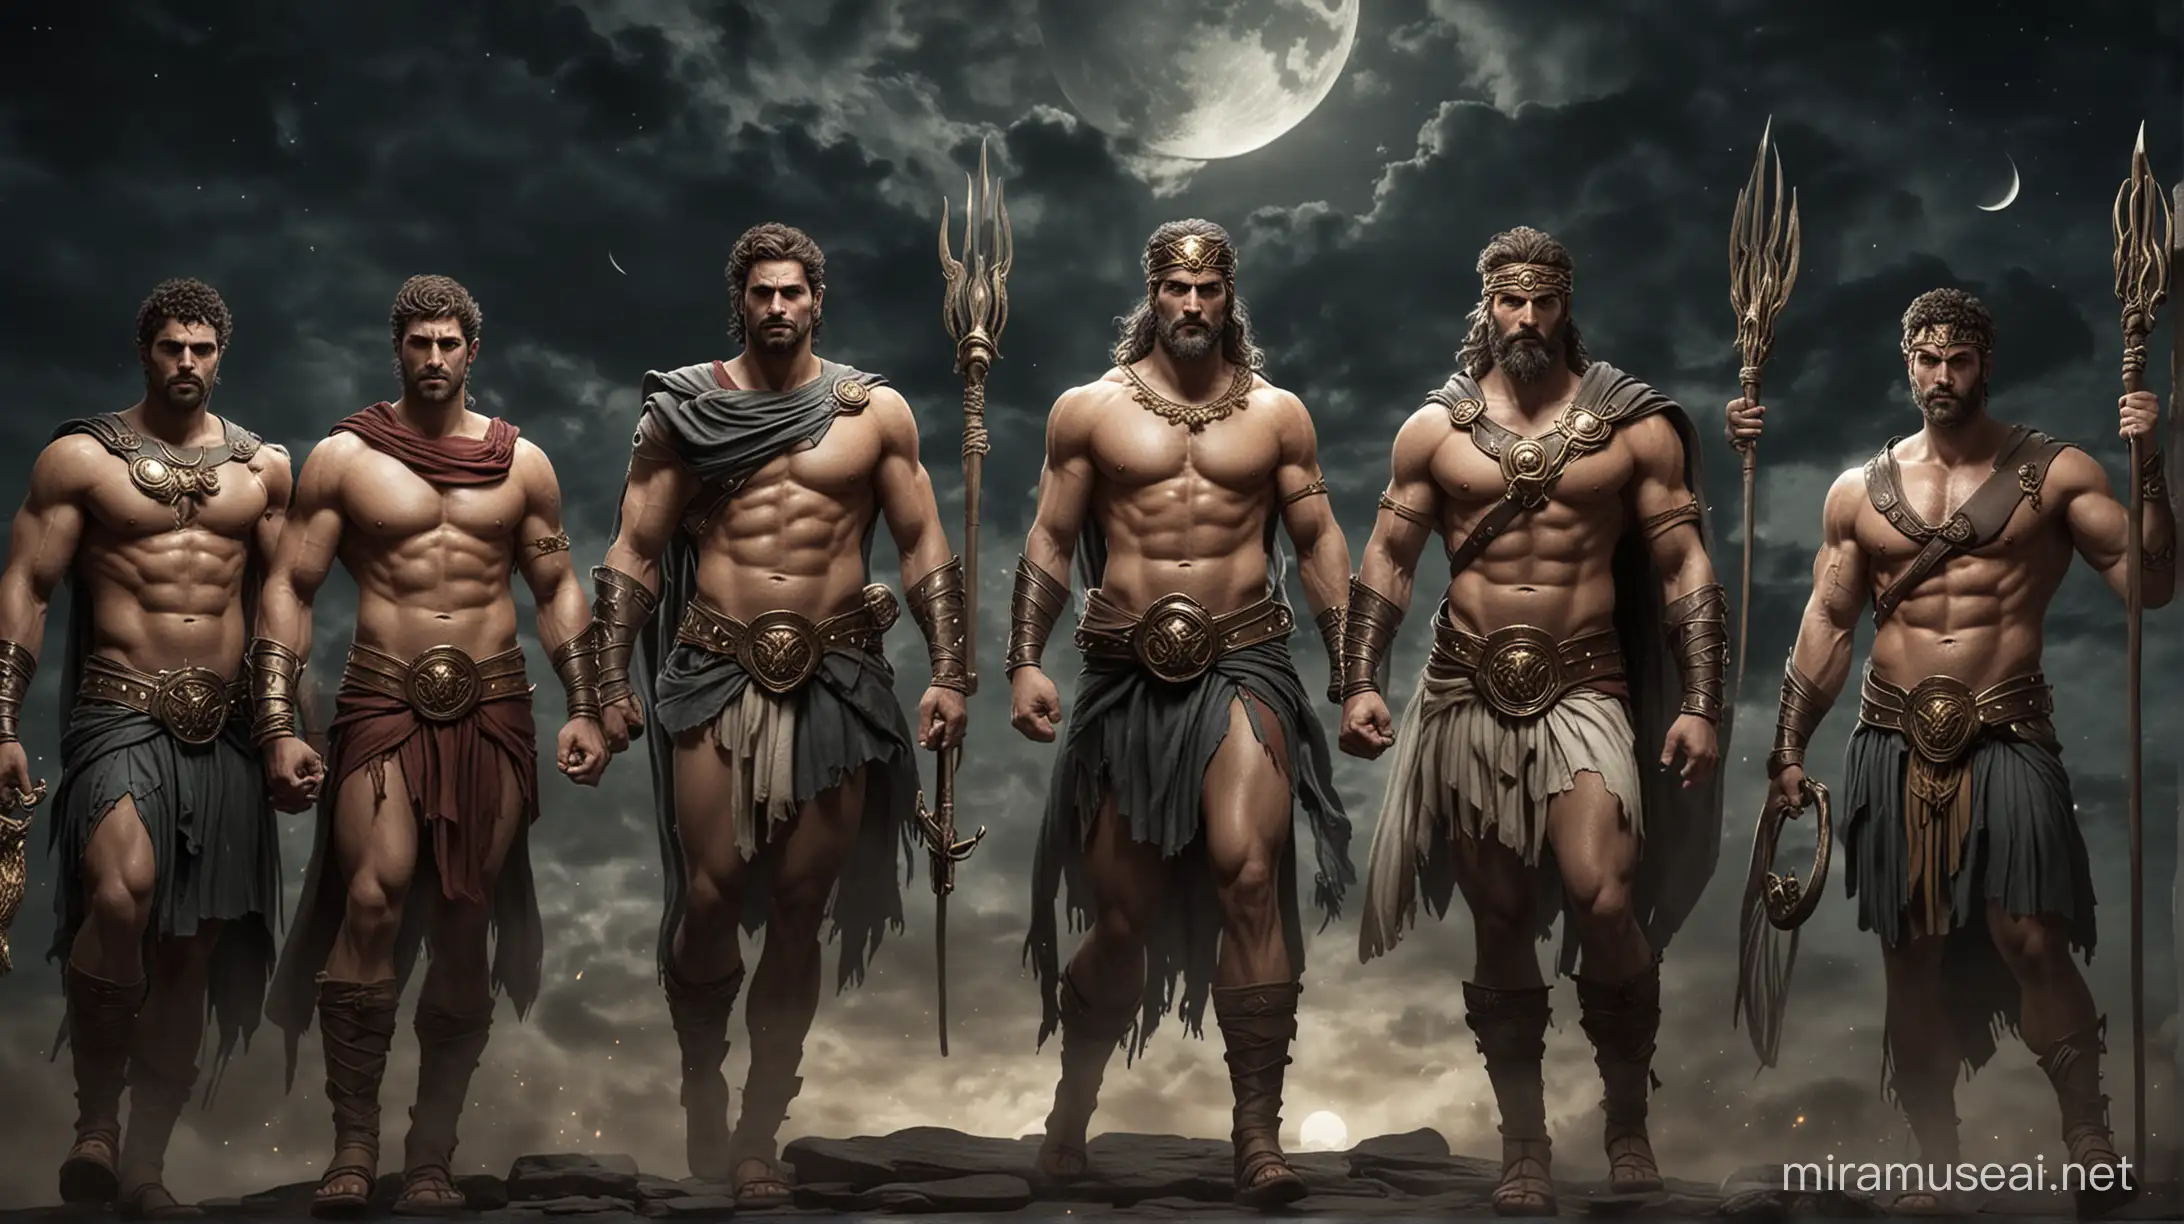 Generate picture of  greek gods , in a fighting scene,  with moon lit sky and dark themed background. The 12 greek gods  and godess are Zeus[male] , Hera[female] , Poseidon[male] , Demeter[female], Athena[female] , Artemis[female], Apollo[male], Hephastus[male], Aphrodite[female],Ares[male],Hermes[male] and Dionysus[male]. keep different body picture of all characters. must give 12 characters with weapons in the hands of male gods.